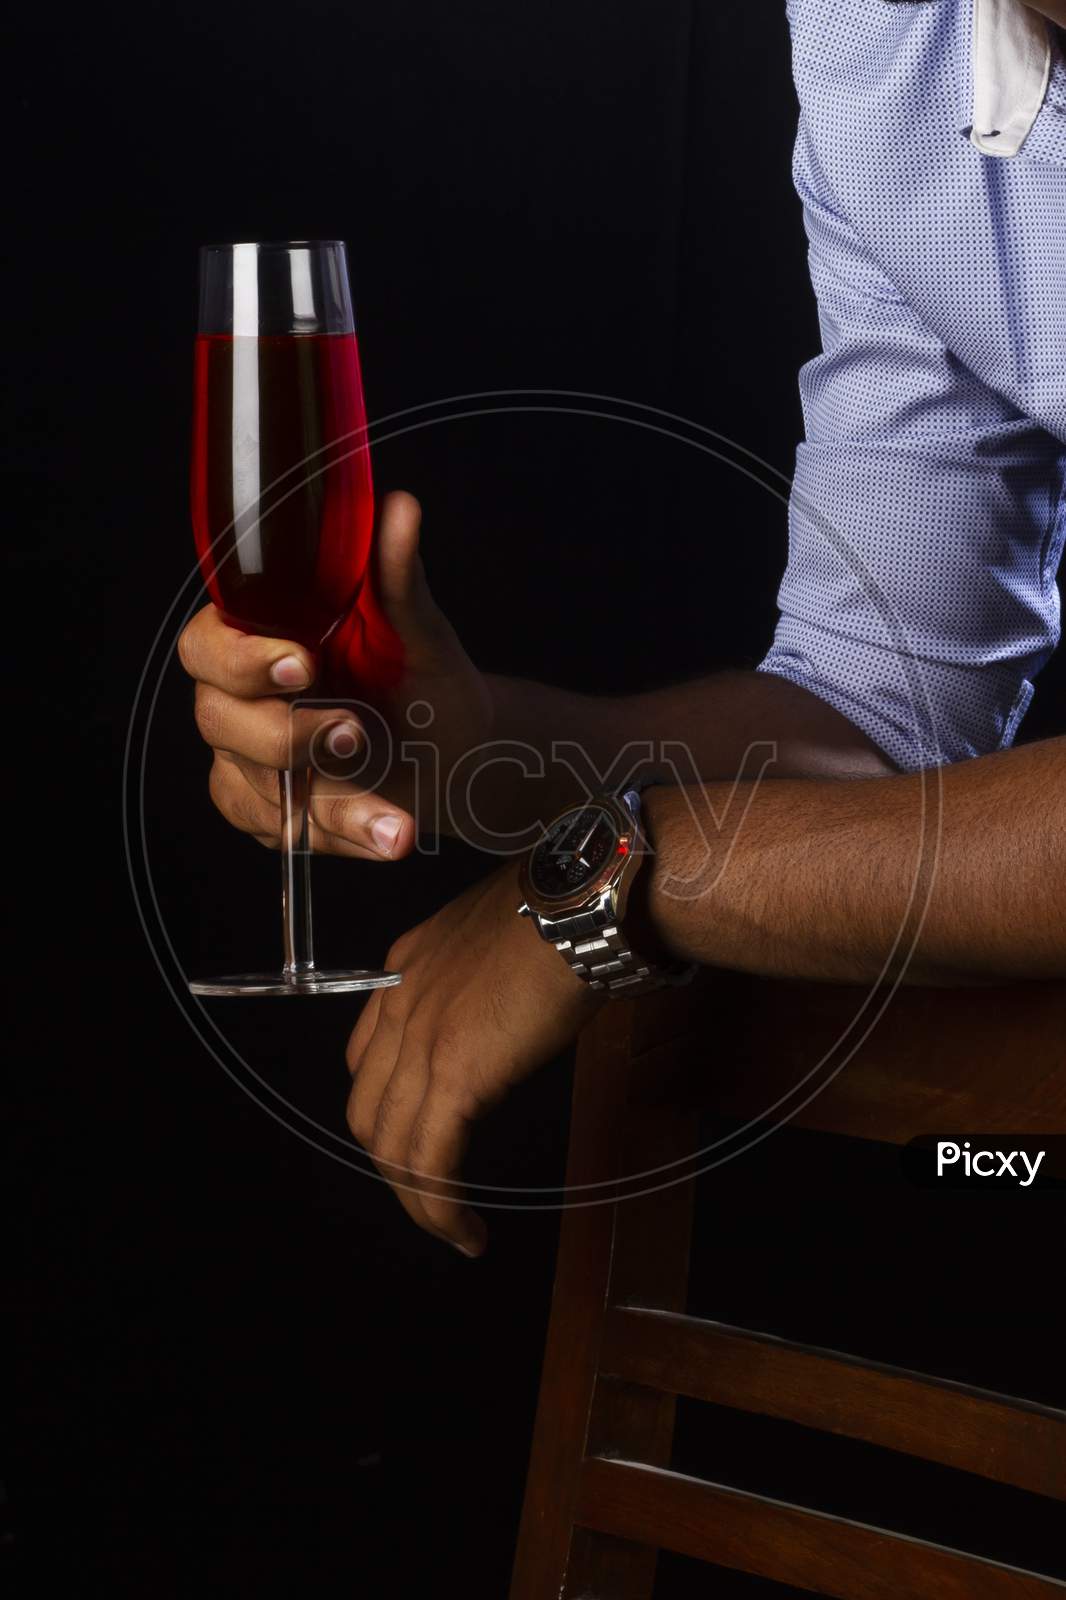 A Glass Of Red Wine With A Fireplace. Hand Holding Glass.